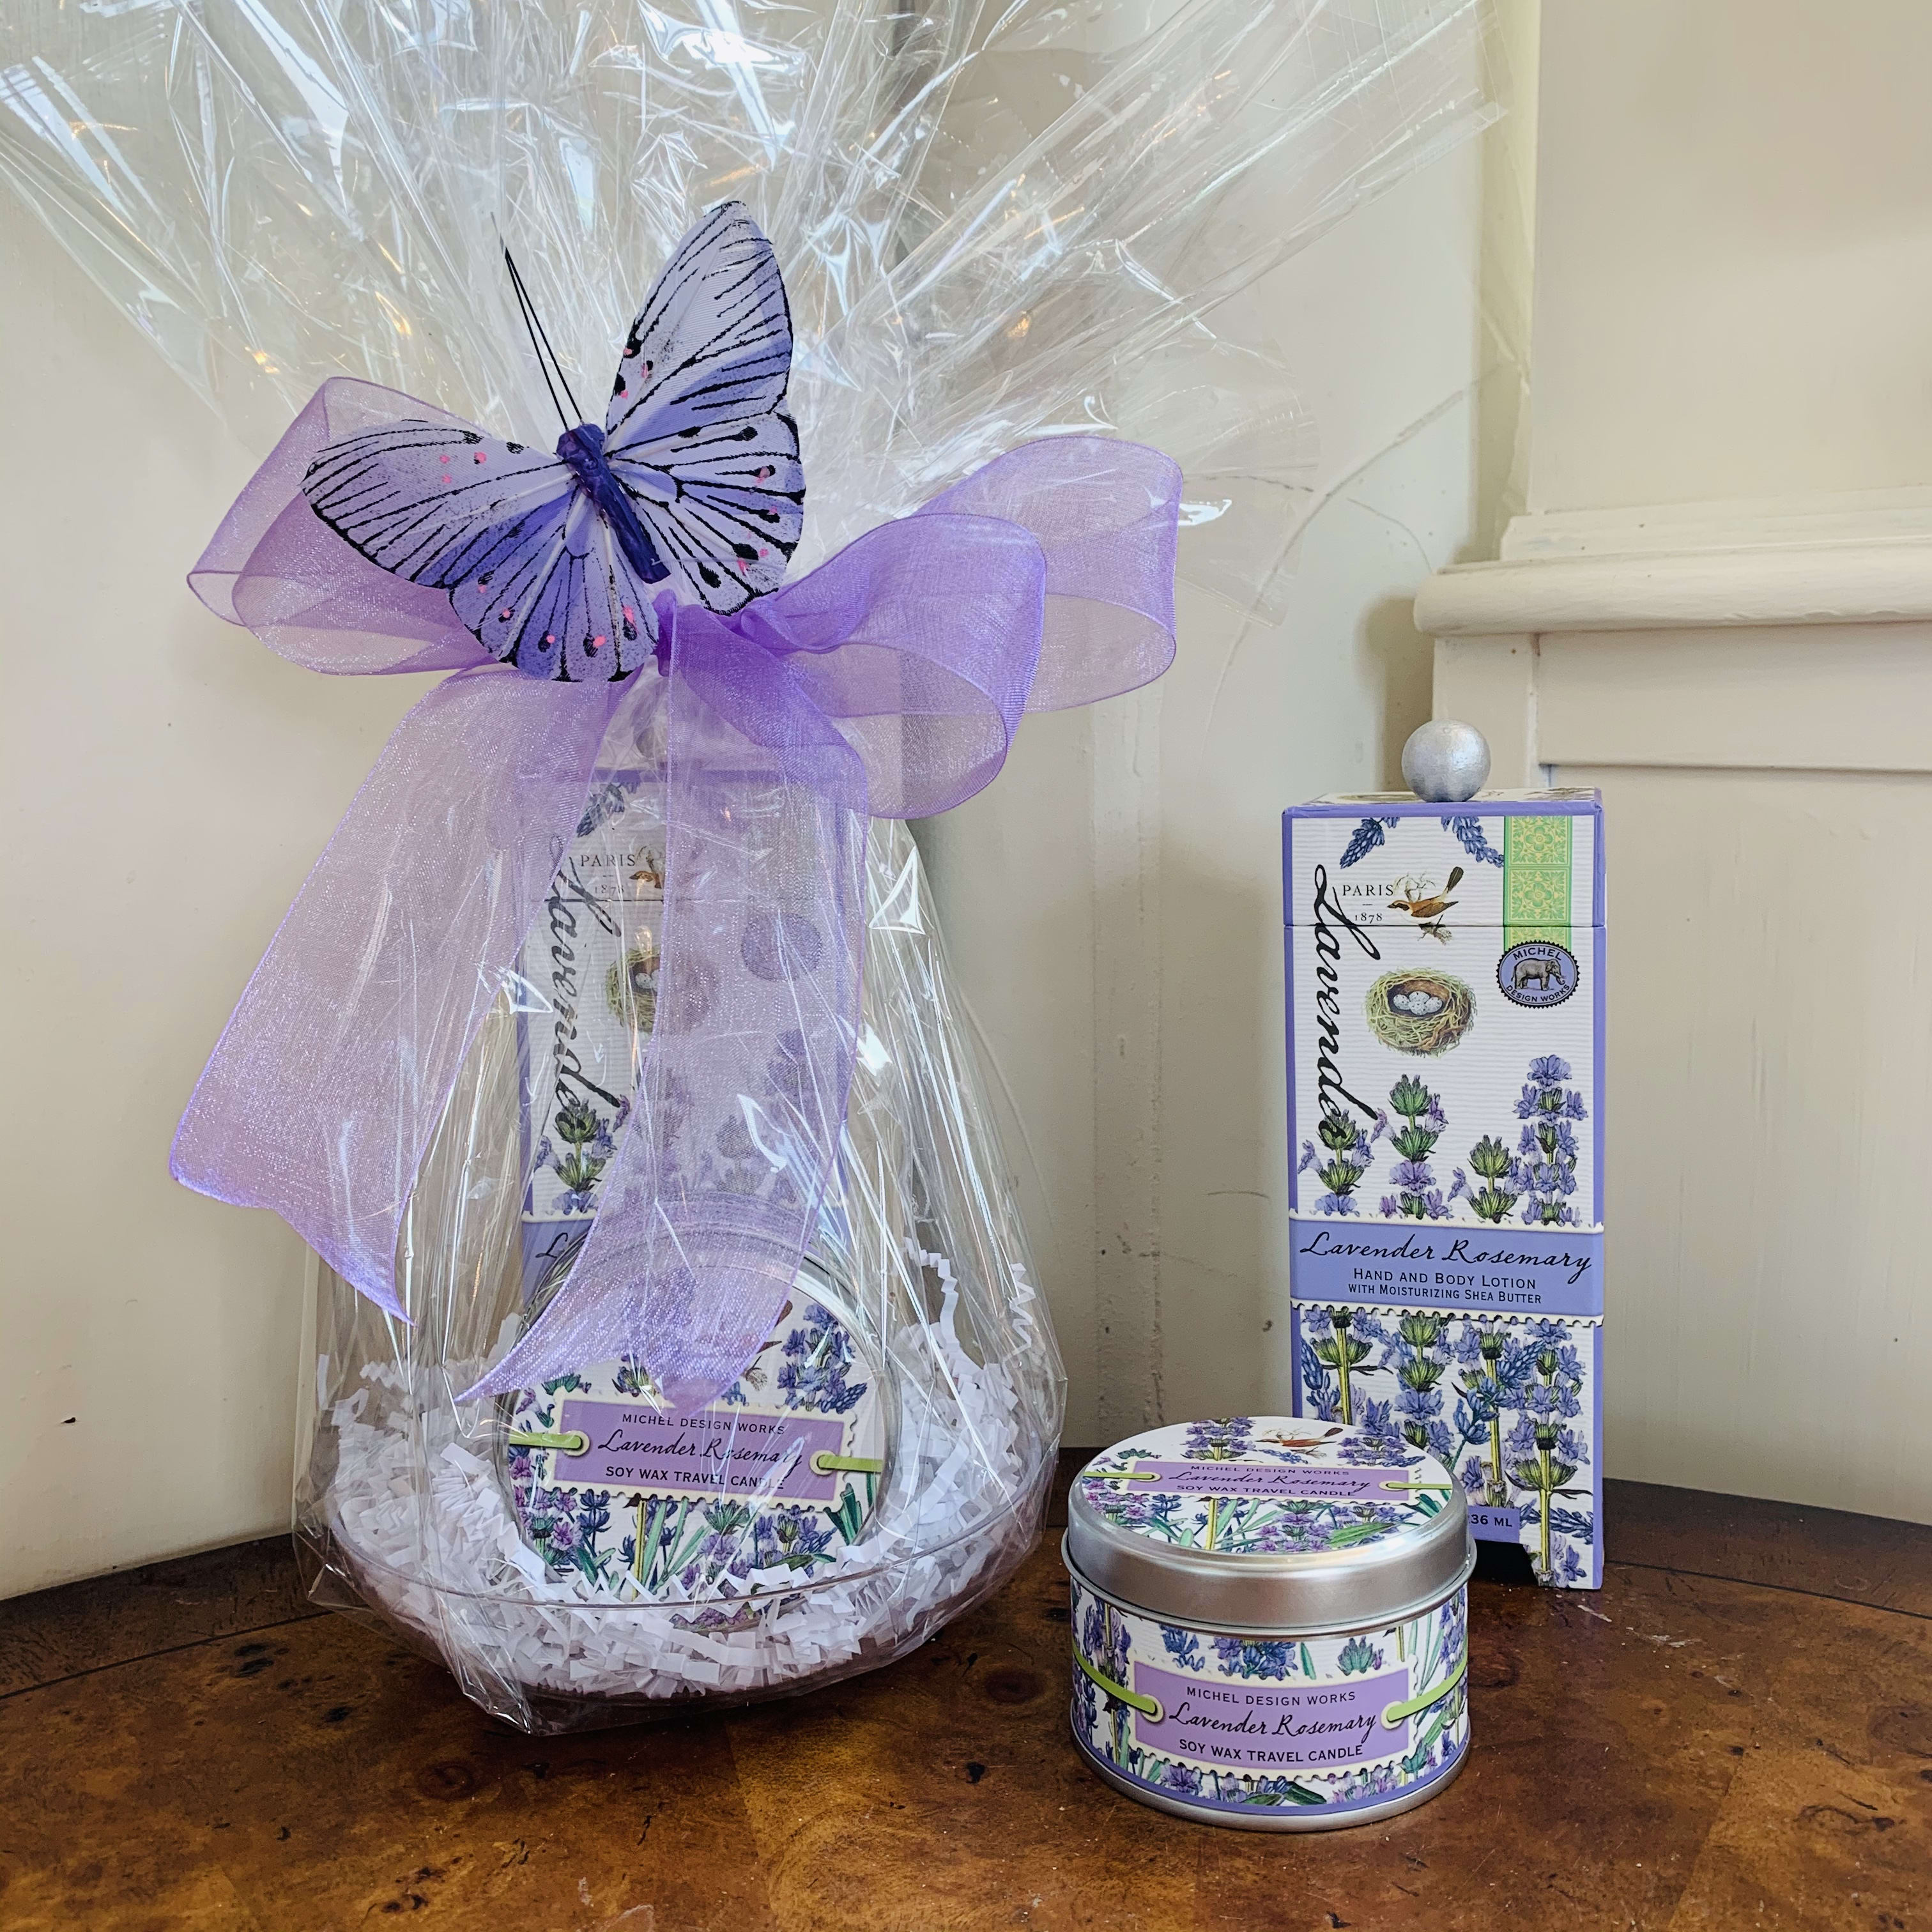 Lavender Rosemary Petite Gift Basket - This petite gift basket includes one hand and body lotion and one scented travel candle beautifully wrapped up and ready to go with a large bow and sweet butterfly accent.    Items included: 1) Our hand and body lotion is made with shea butter, aloe, and other botanical ingredients. The decorative bottle of luxurious lotion is packaged in a beautiful keepsake gift box.  8 fl. oz. / 236 ml lotion.  2) Our all-natural, 100% soy wax travel candle is nontoxic, biodegradable and clean burning. The handy, decorative, and versatile tin can be used at home or when traveling, indoors or out.  4 oz./113.4 g. Over 20 hrs. approximate burn time.  Fragrance: The unmistakable scent of lavender with rosemary and a hint of eucalyptus.  Customizable gift baskets available upon request. Please give us a call at 775-348-6161 for assistance putting together the perfect aromatherapy basket for your loved one. 